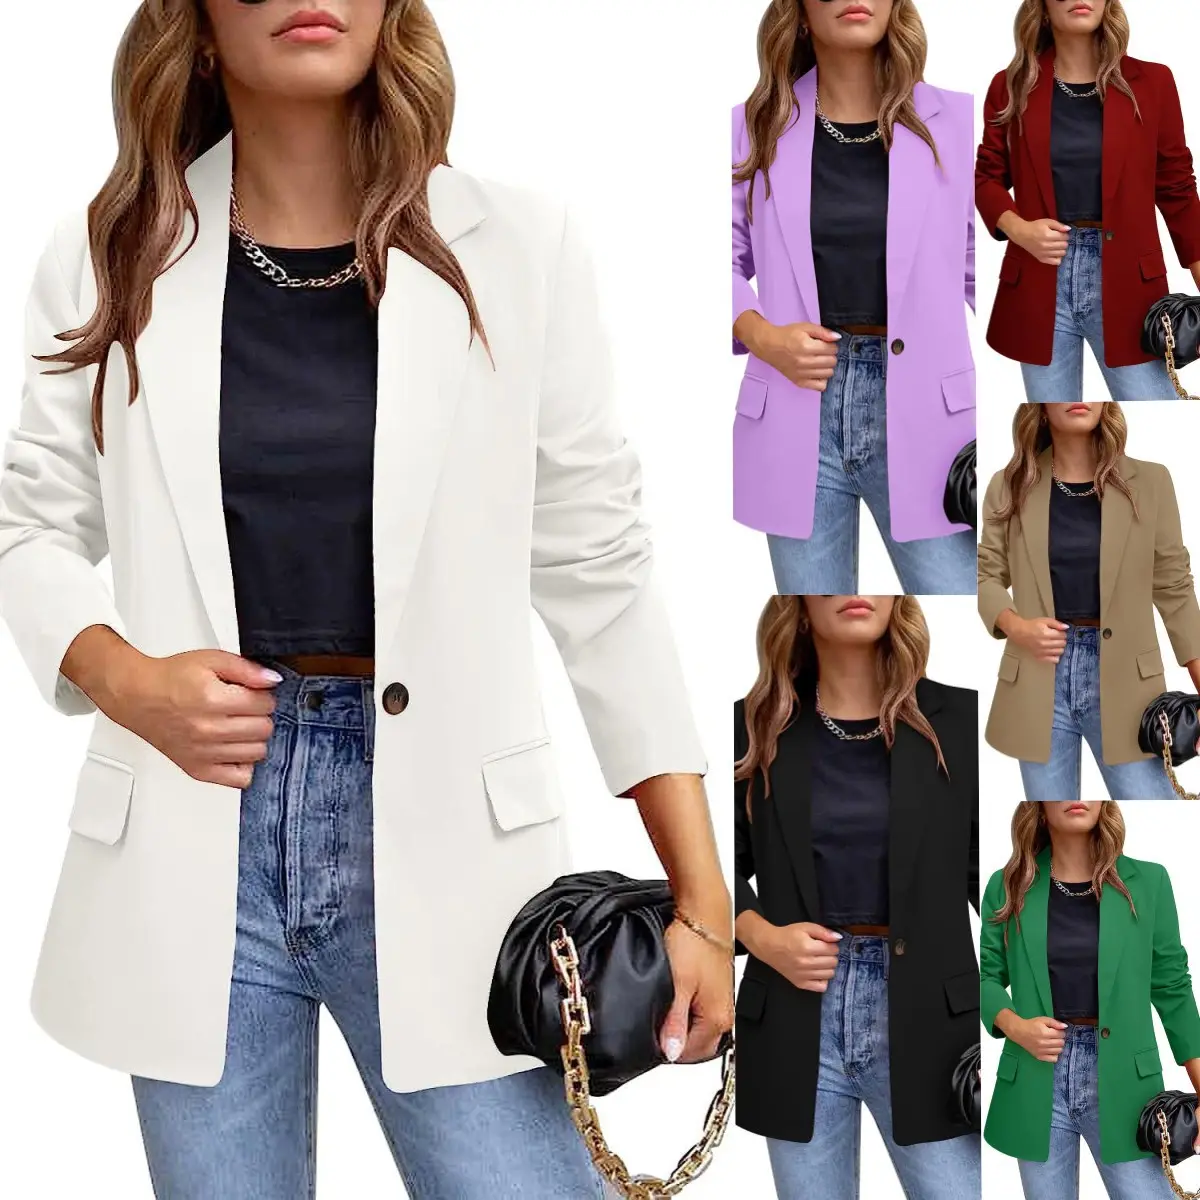 POSSNEY Women's Long Sleeve Blazer Solid Color Casual Basic Single Button Work Blazer Coat with Pockets